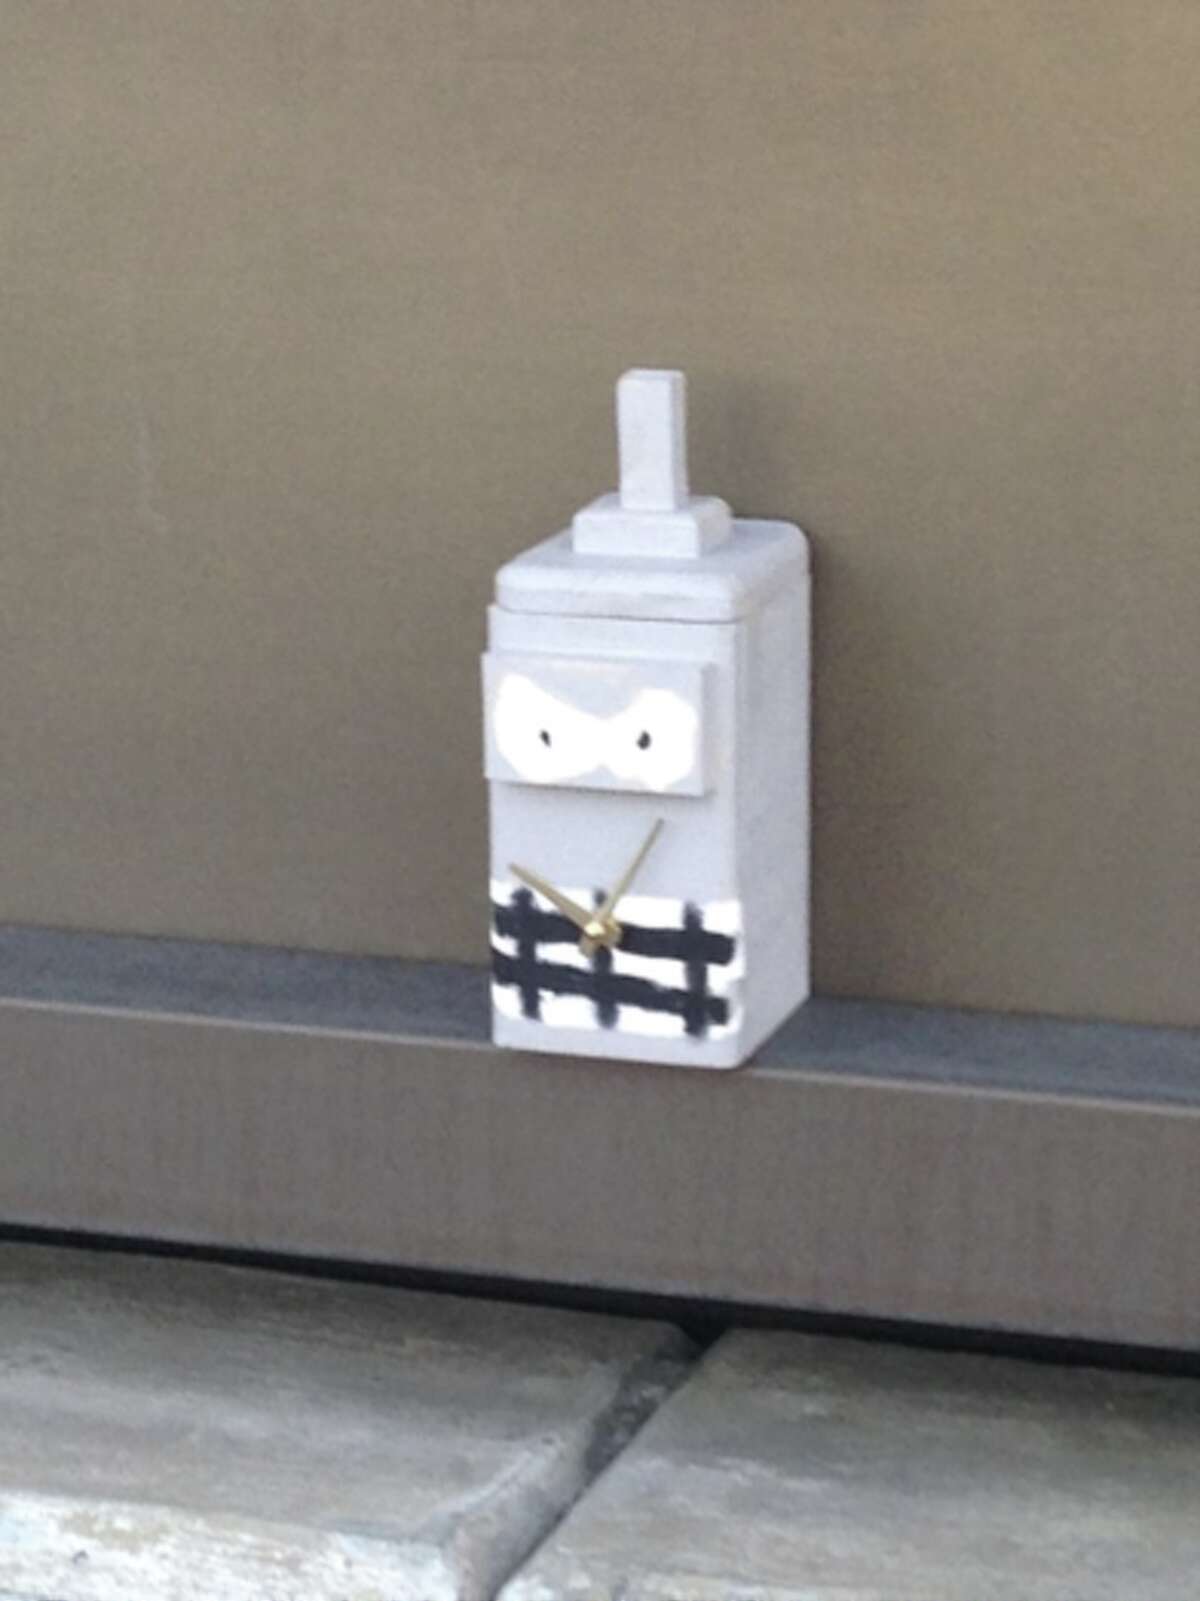 A Tomlinson Middle School student's project left near the railroad tracks in Fairfield, Conn. caused Metro-North service to shut down during rush hour on Friday morning. The project is a box resembling the character Bender from the animated television show 'Futurama.'